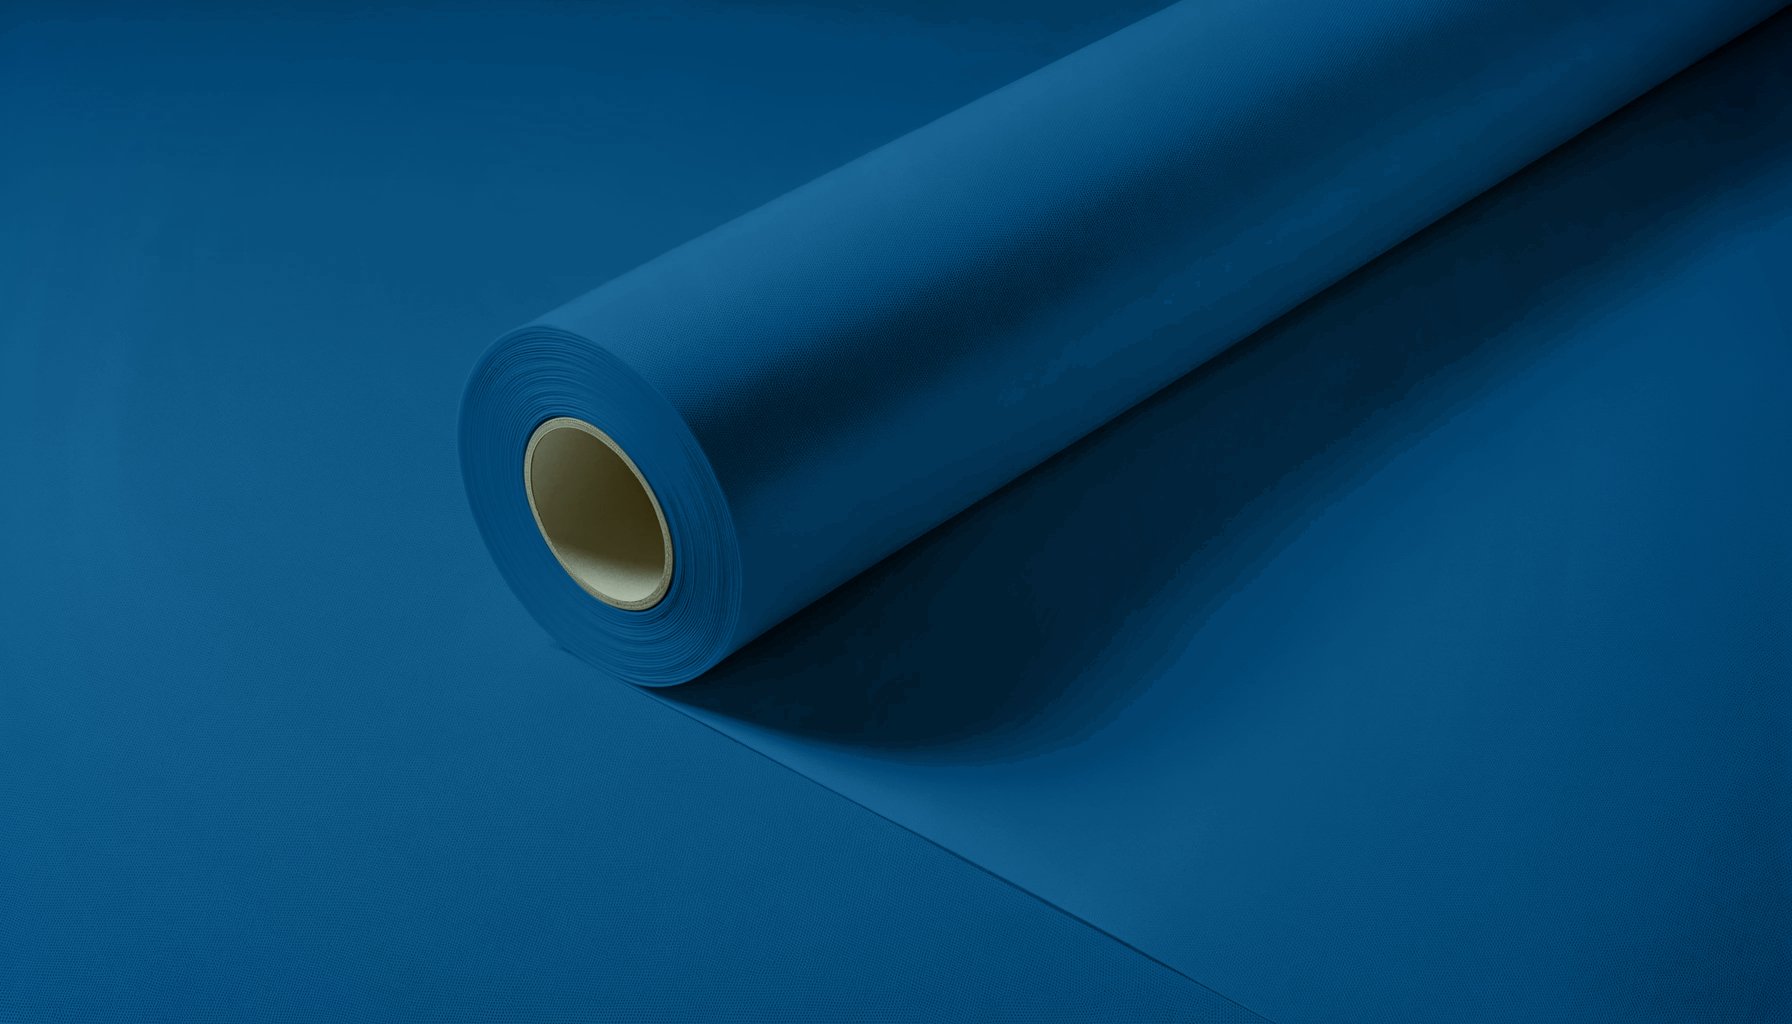 Peel & Stick Removable Re-usable Paint - Color RAL 5010 Gentian Blue - offRAL™ - RALRAW LLC, USA